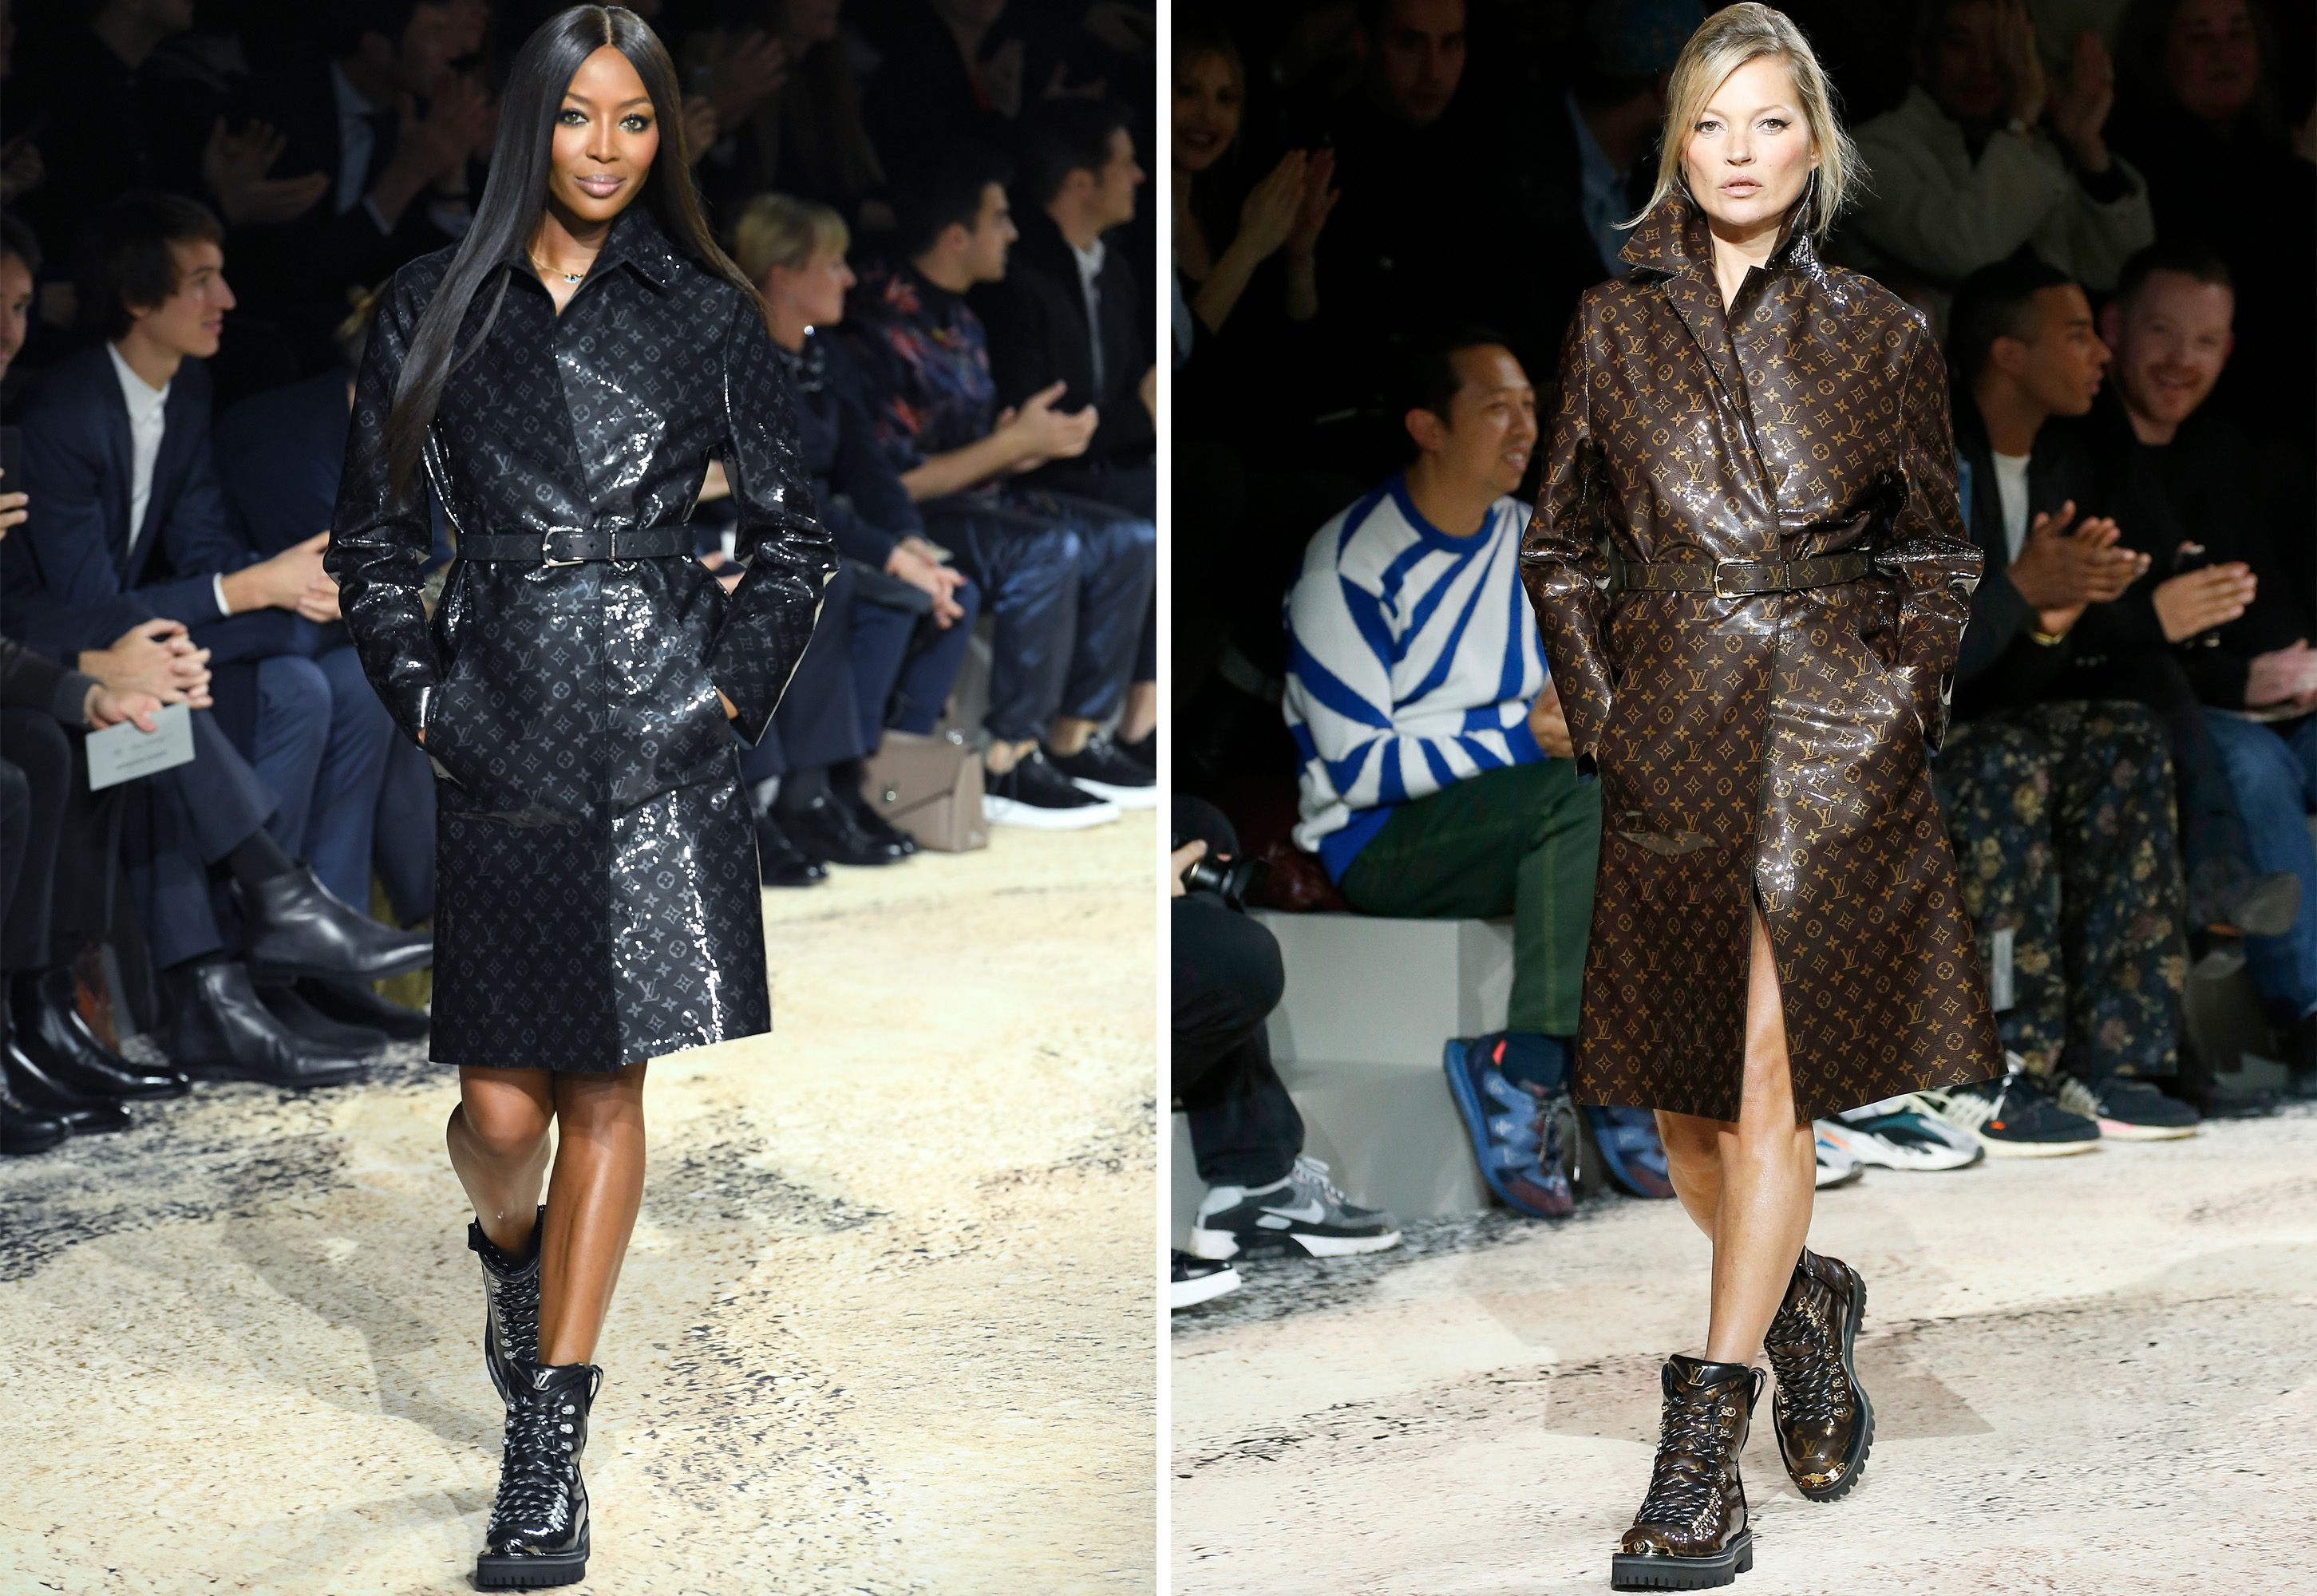 Kate Moss holds court at Louis Vuitton menswear show